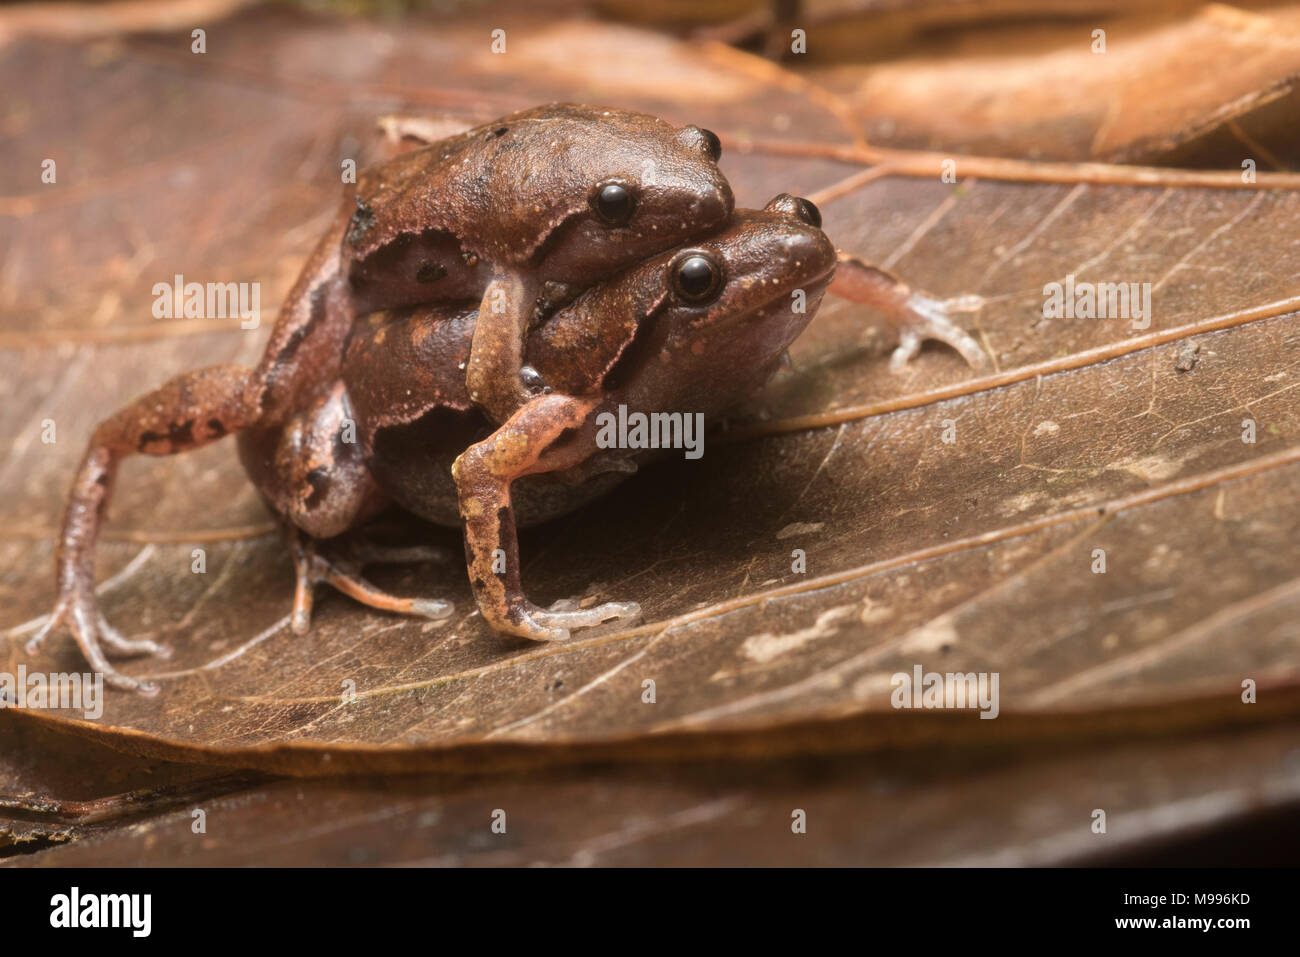 A pair of bolivian bleating frogs (Hamptophryne boliviana) from Peru, these small microhylids can be found breeding after heavy rains. Stock Photo